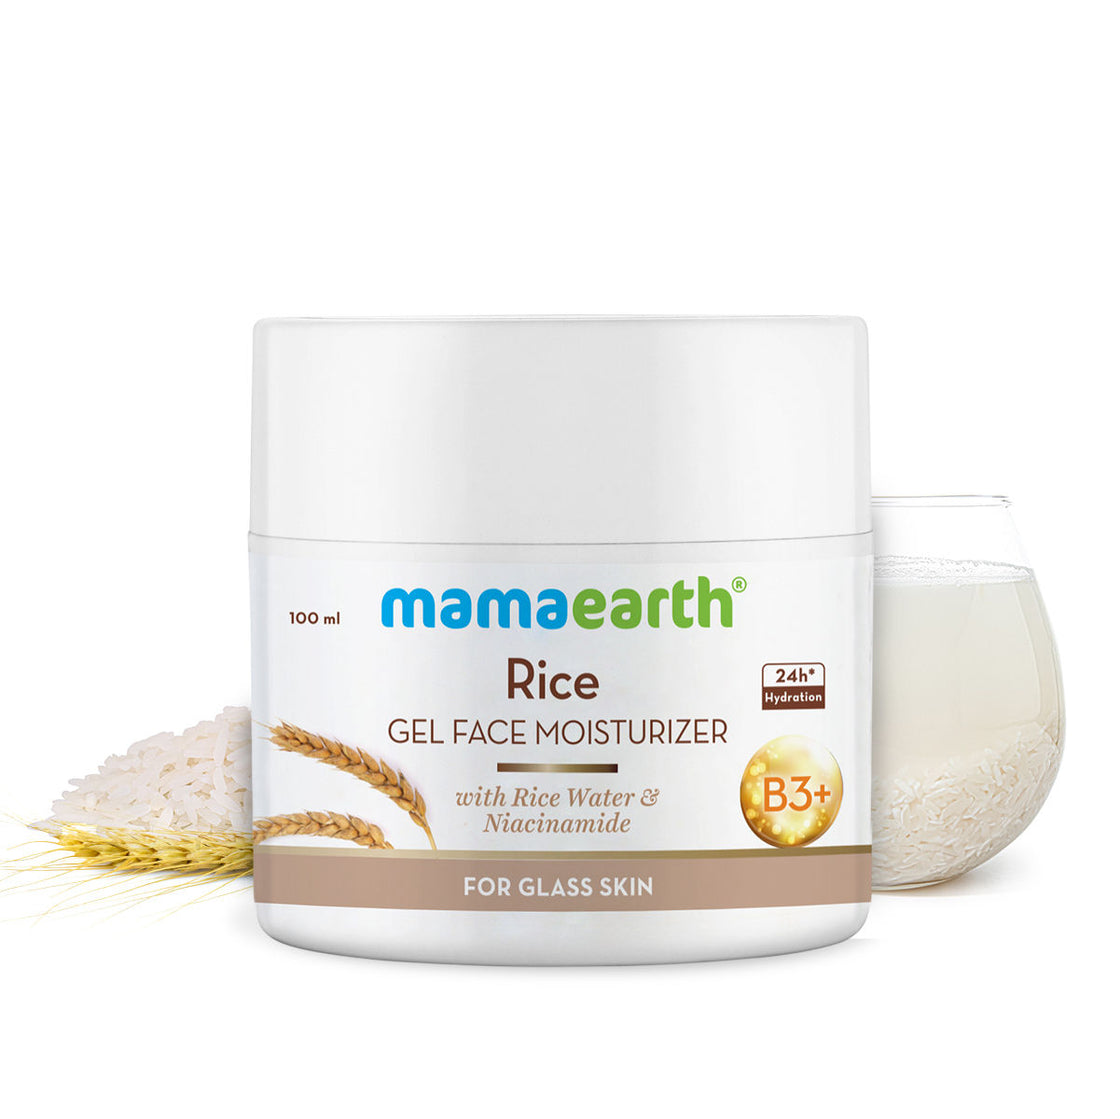 Mamaearth Rice Gel Face Moisturizer With Rice Water & Niacinamide For Glass Skin-2